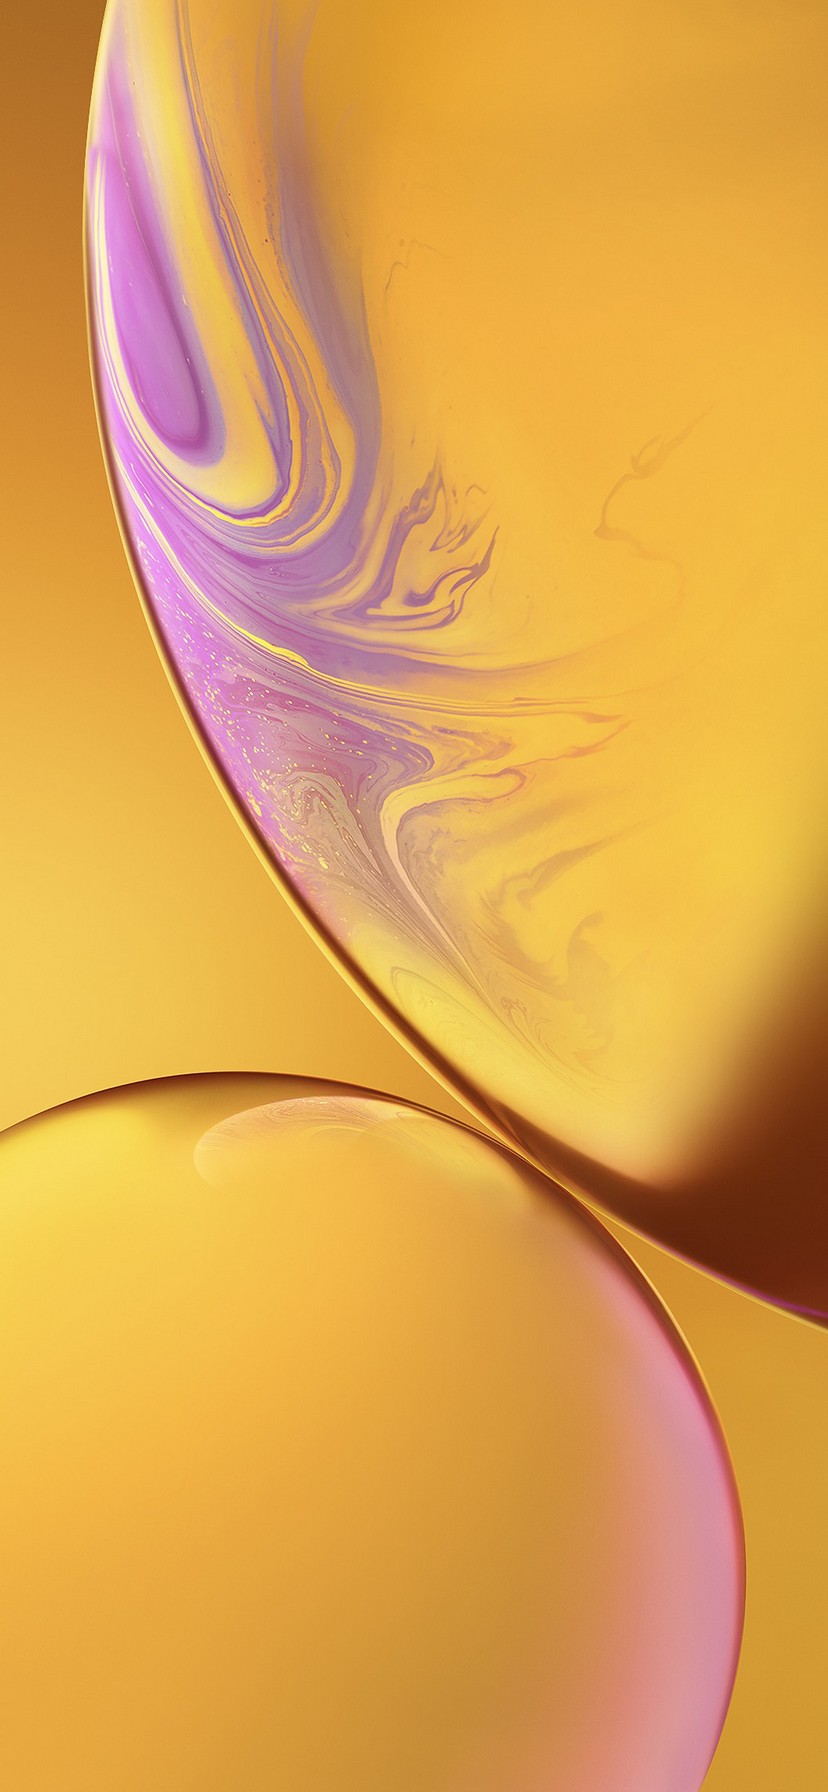 iPhone XR Lock Screen Wallpaper with high-resolution 828x1792 pixel. You can set as wallpaper for Apple iPhone X, XS Max, XR, 8, 7, 6, SE, iPad. Enjoy and share your favorite HD wallpapers and background images